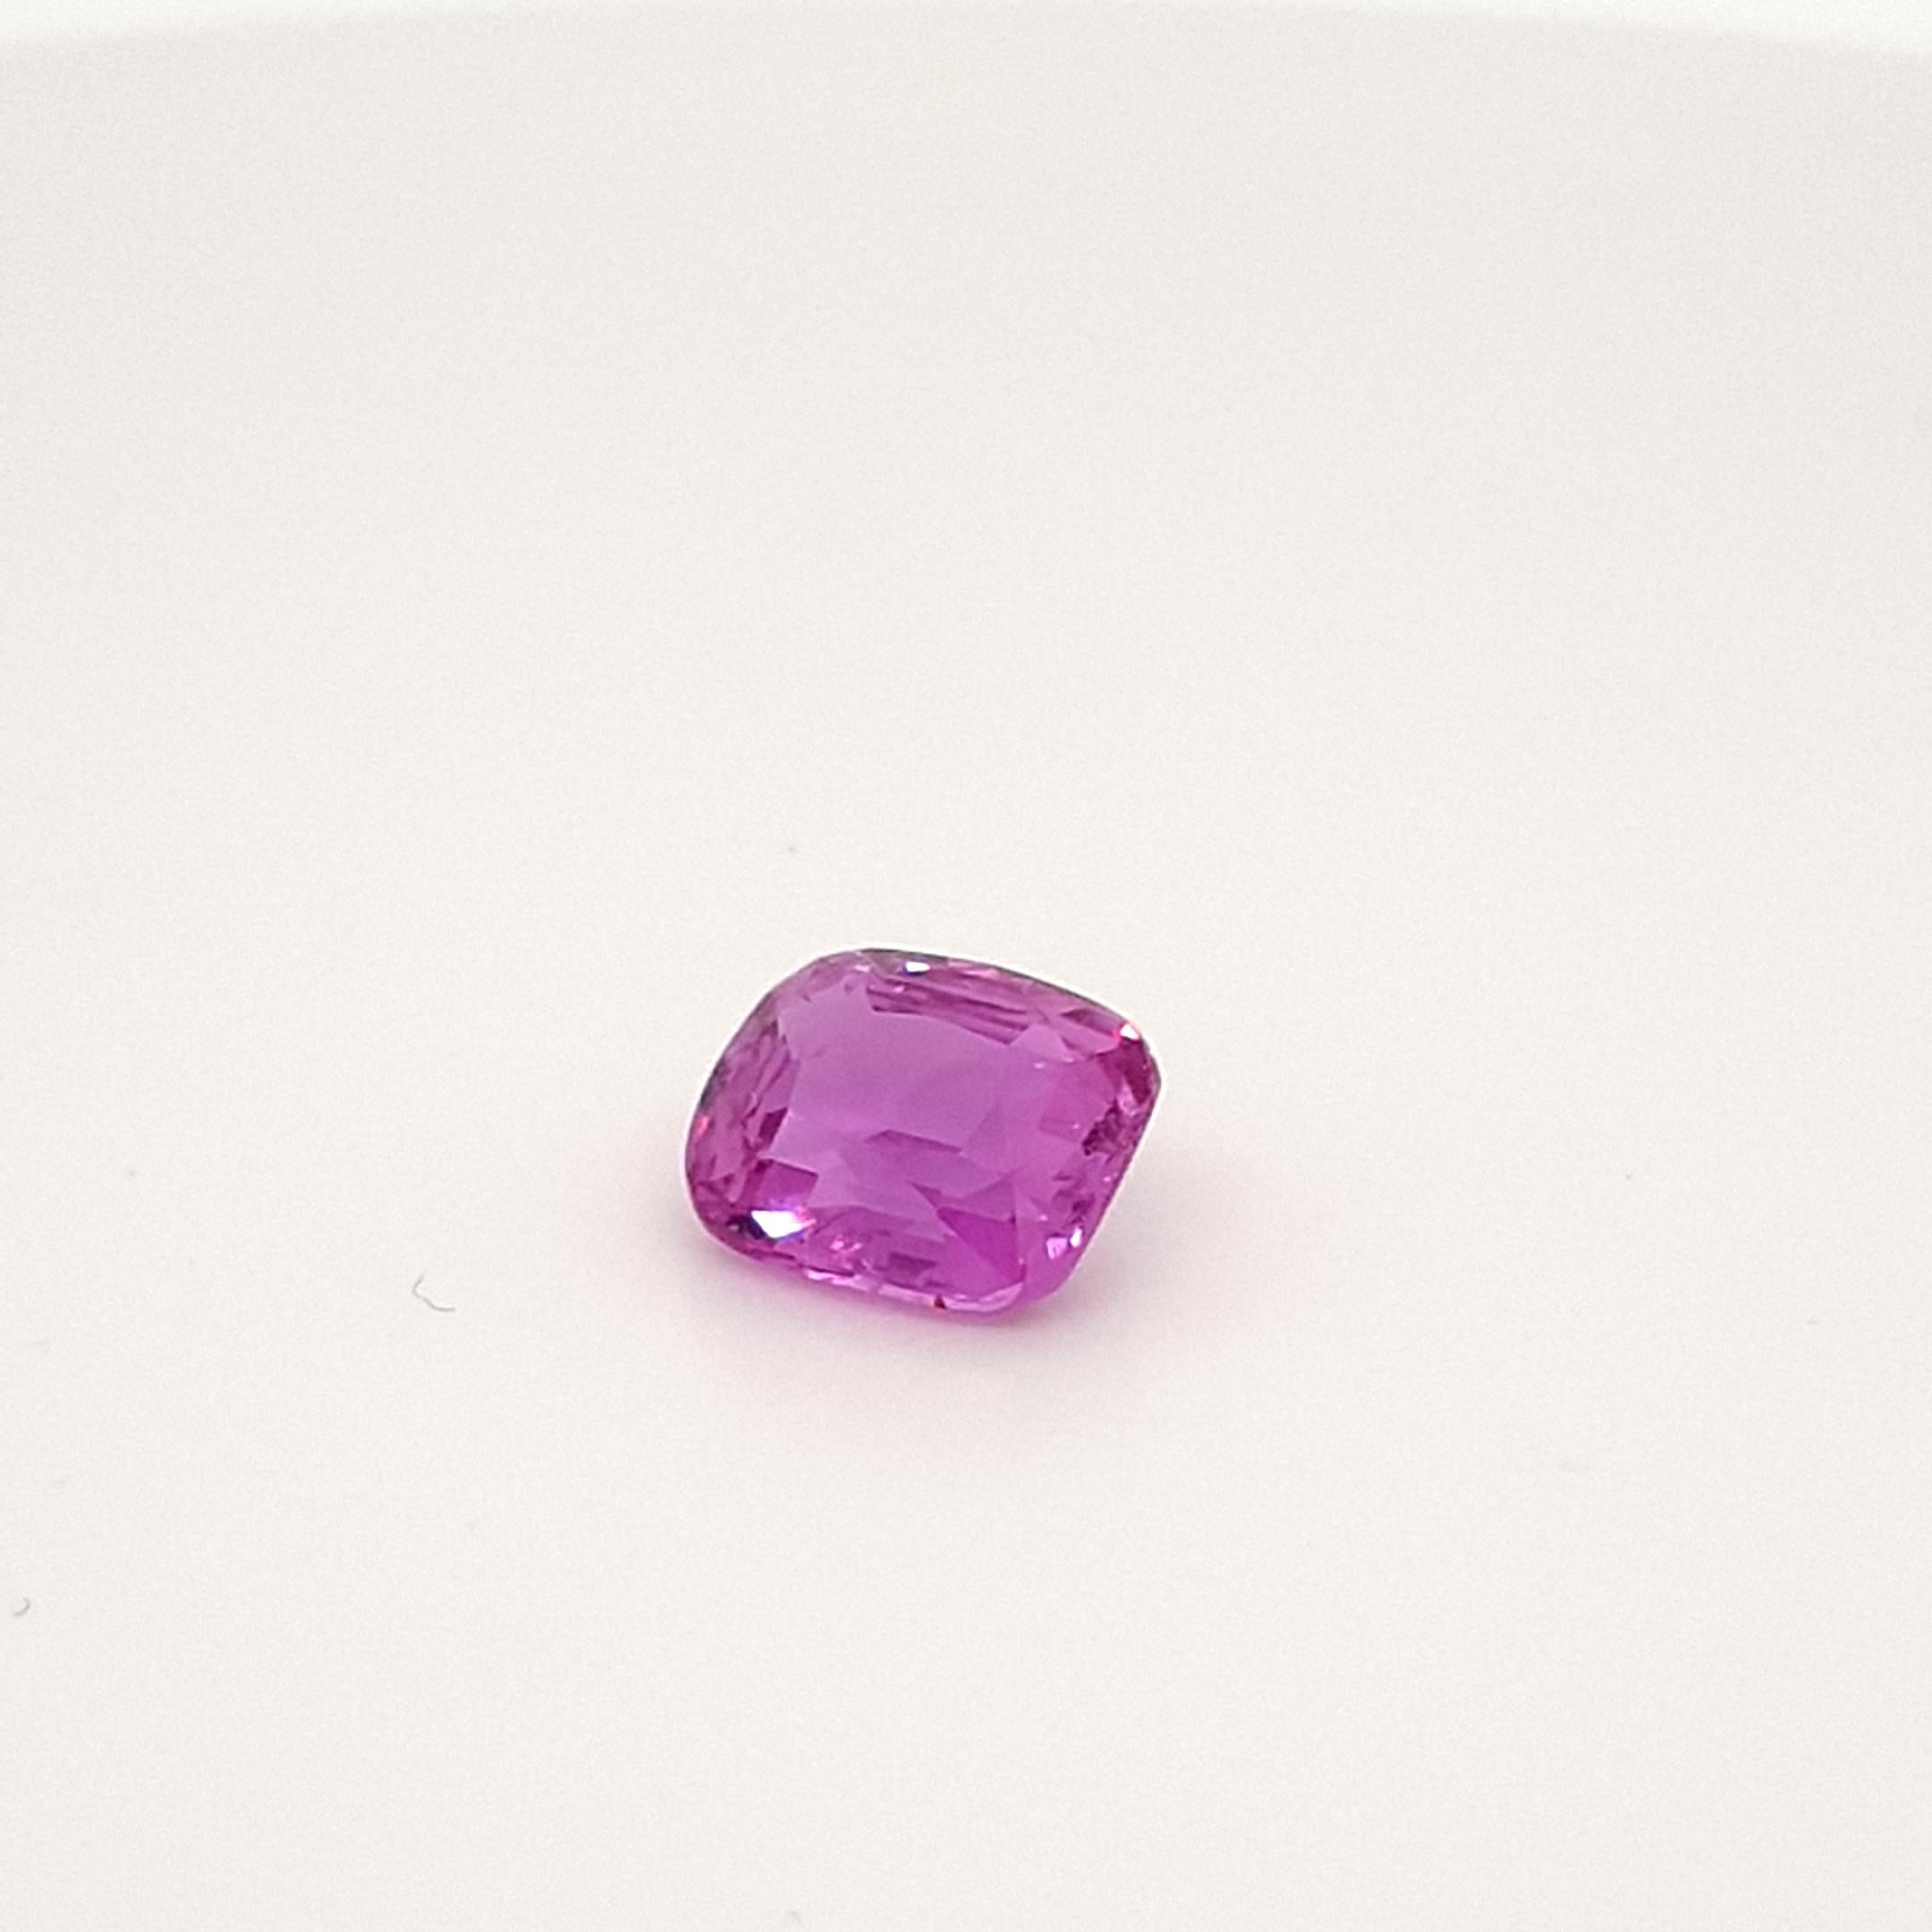 Pink Violet Sapphire, Faceted Gem, 3, 04 Ct., Loose Gemstone, no treatments For Sale 3